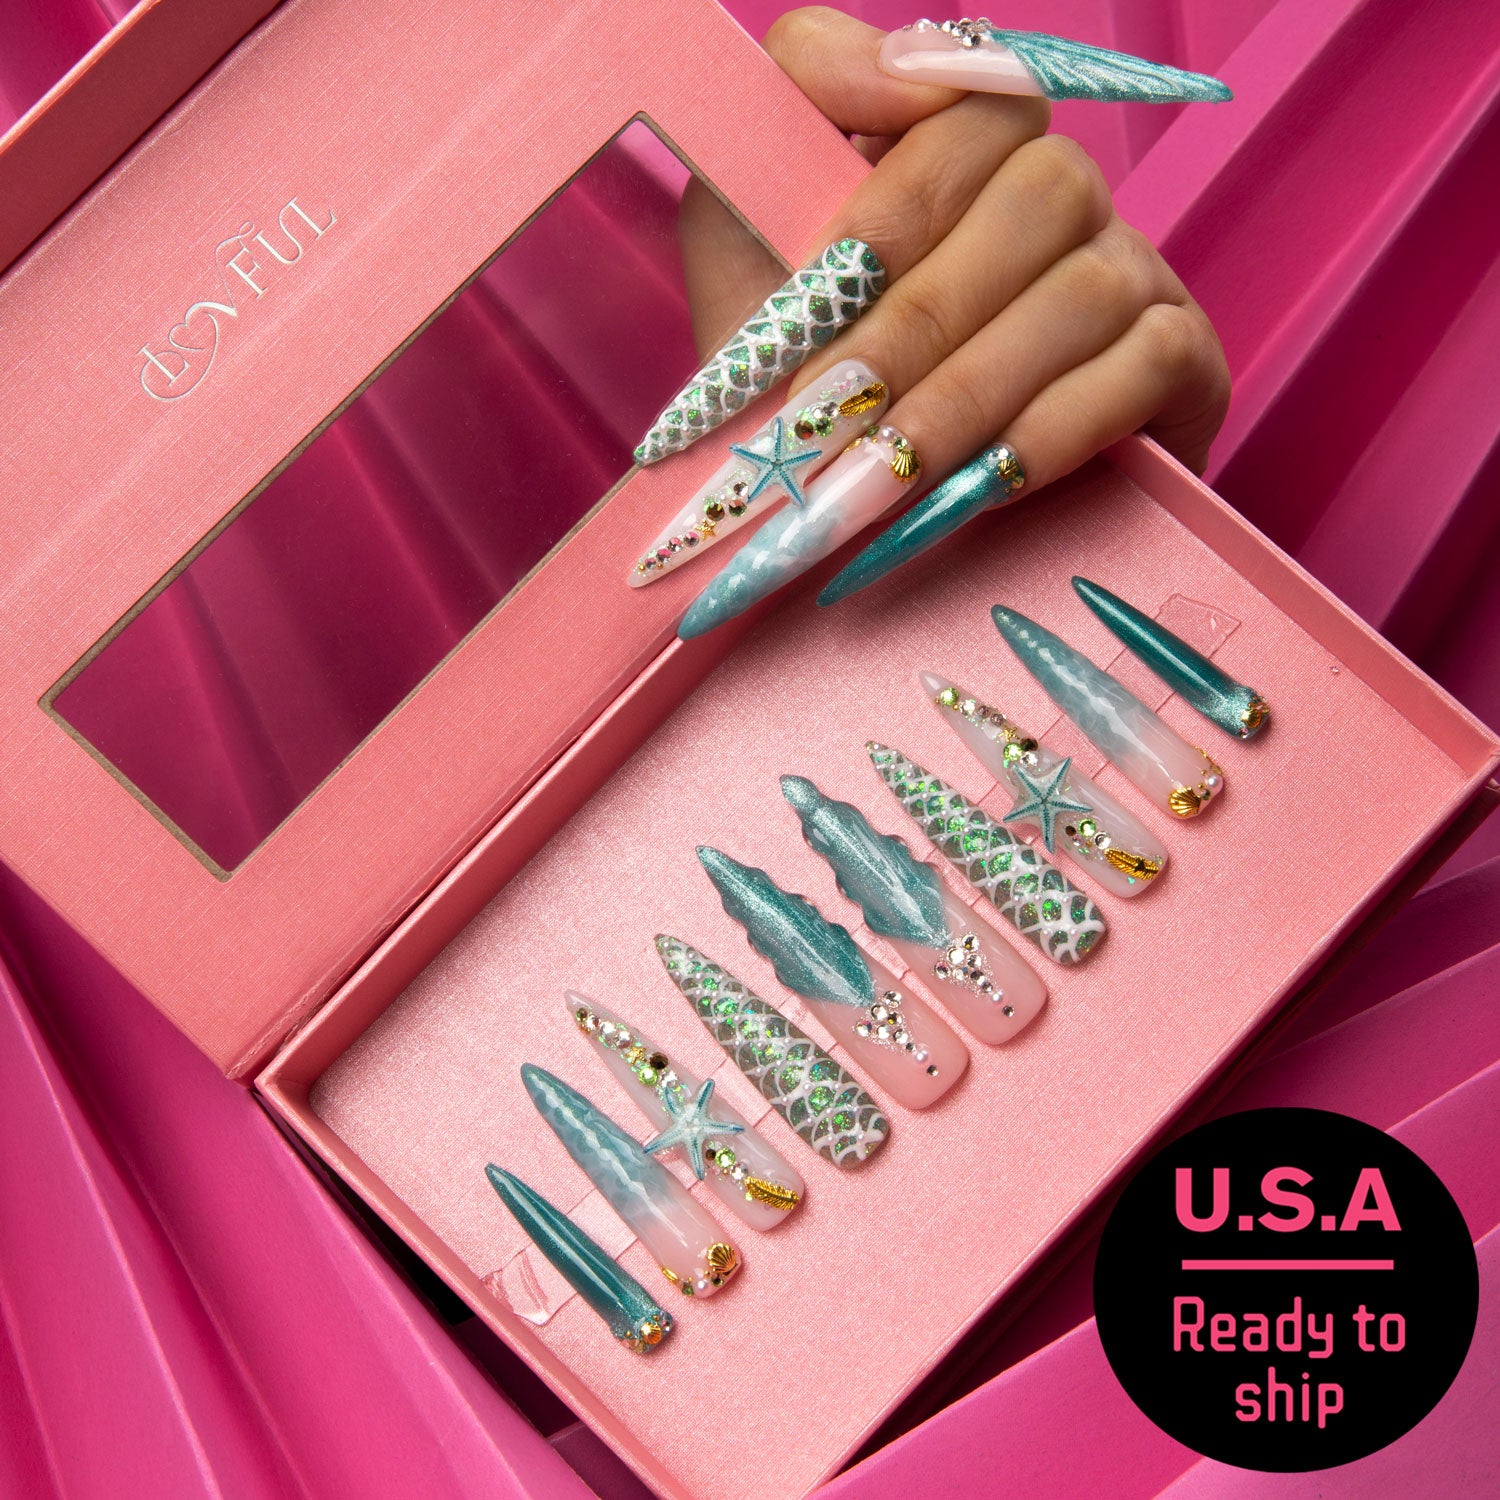 'Surfing Girls' stiletto press-on nails with Hawaii sea blue base color, starfish and glitter decorations, neatly displayed in a pink box. U.S.A Ready to ship.